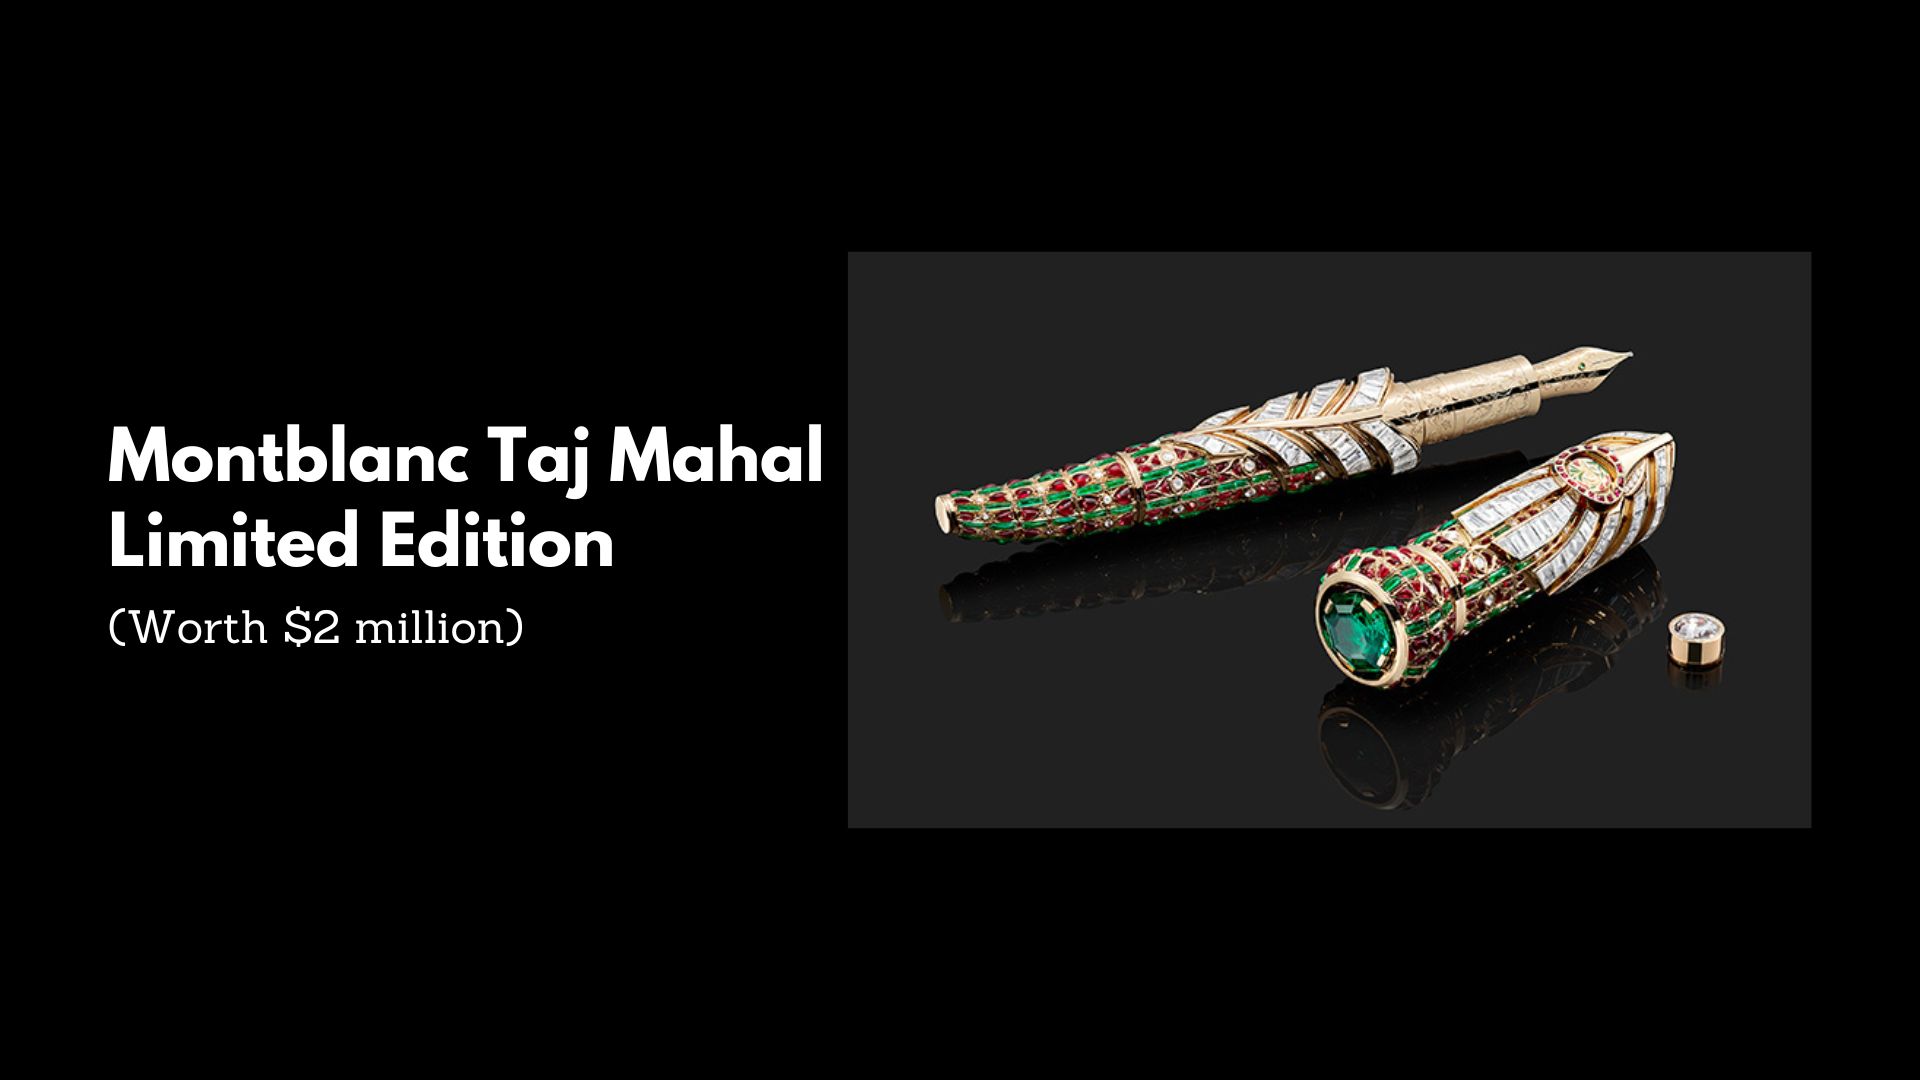 Montblanc Taj Mahal Limited Edition - (Worth $2 Million) - second Most expensive pens 